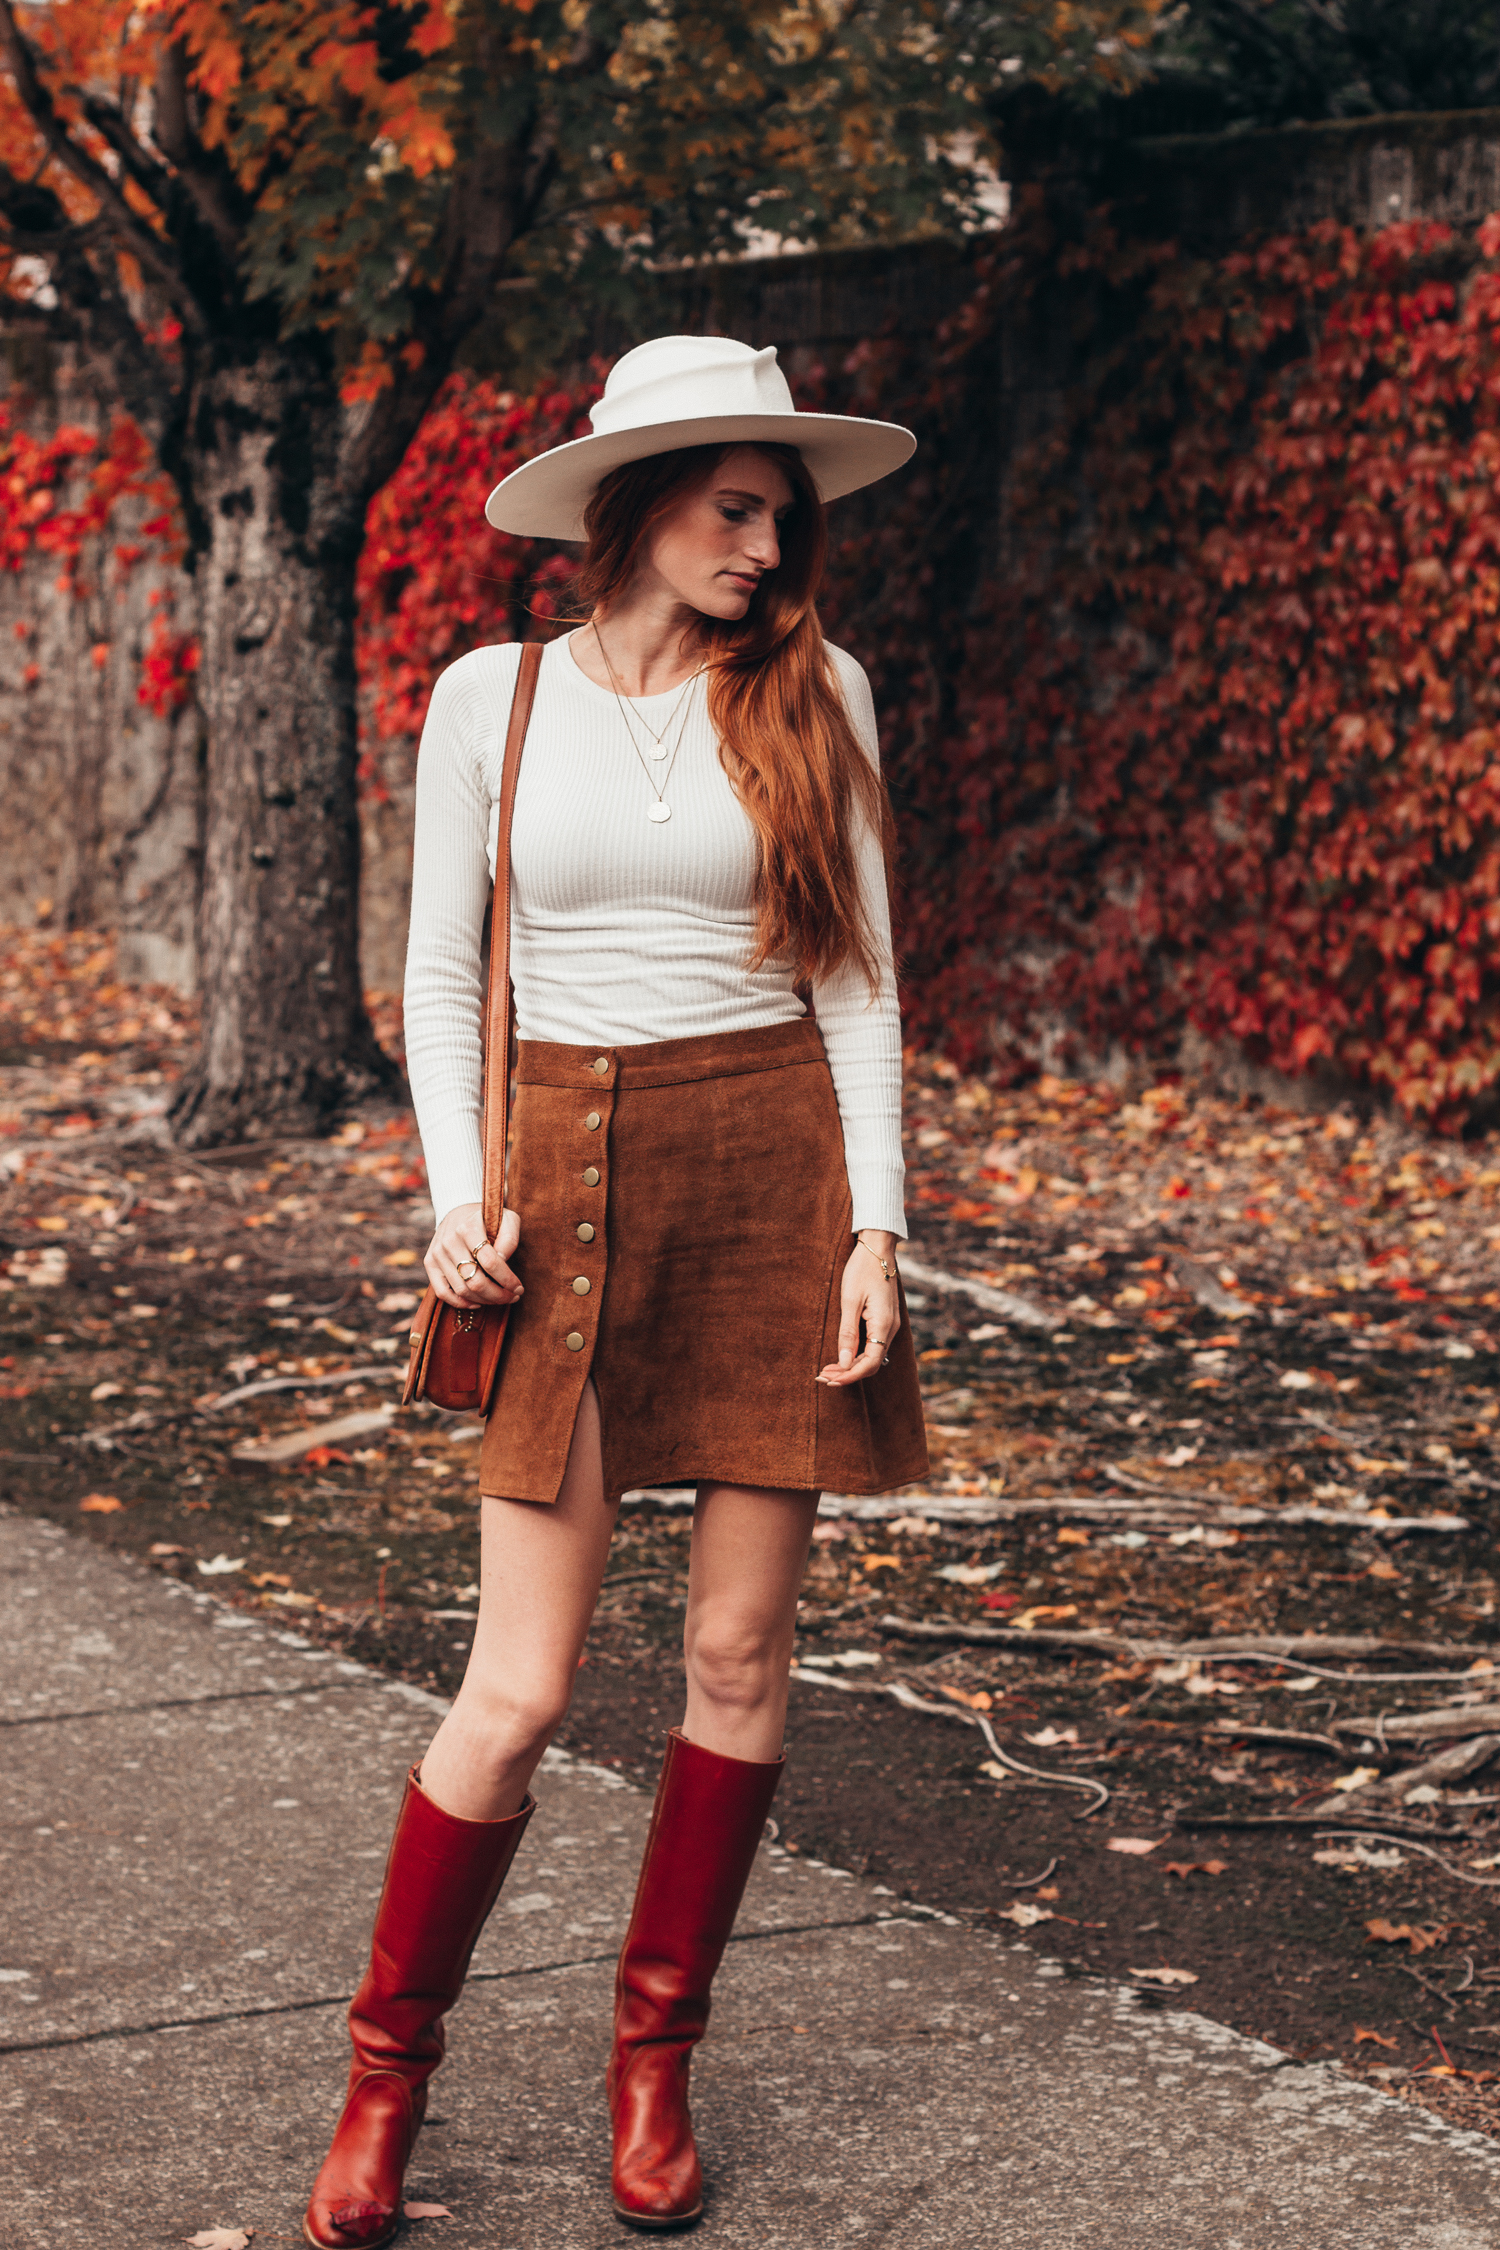 How To Style A Brown And White Outfit For Fall